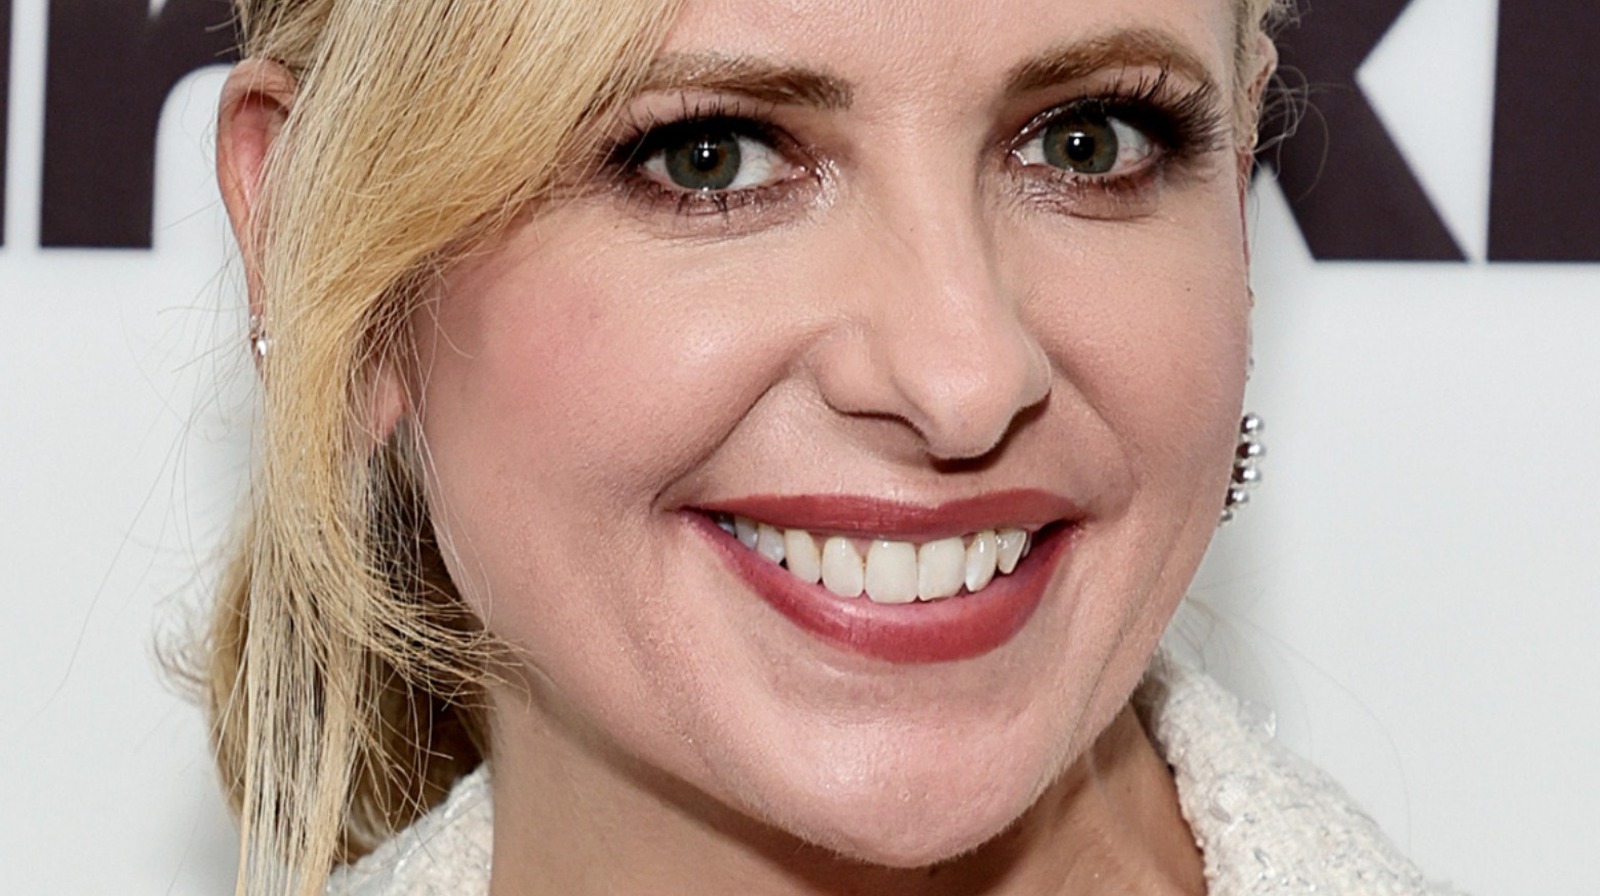 18 Things to Know About Jewish Actress Sarah Michelle Gellar - Hey Alma